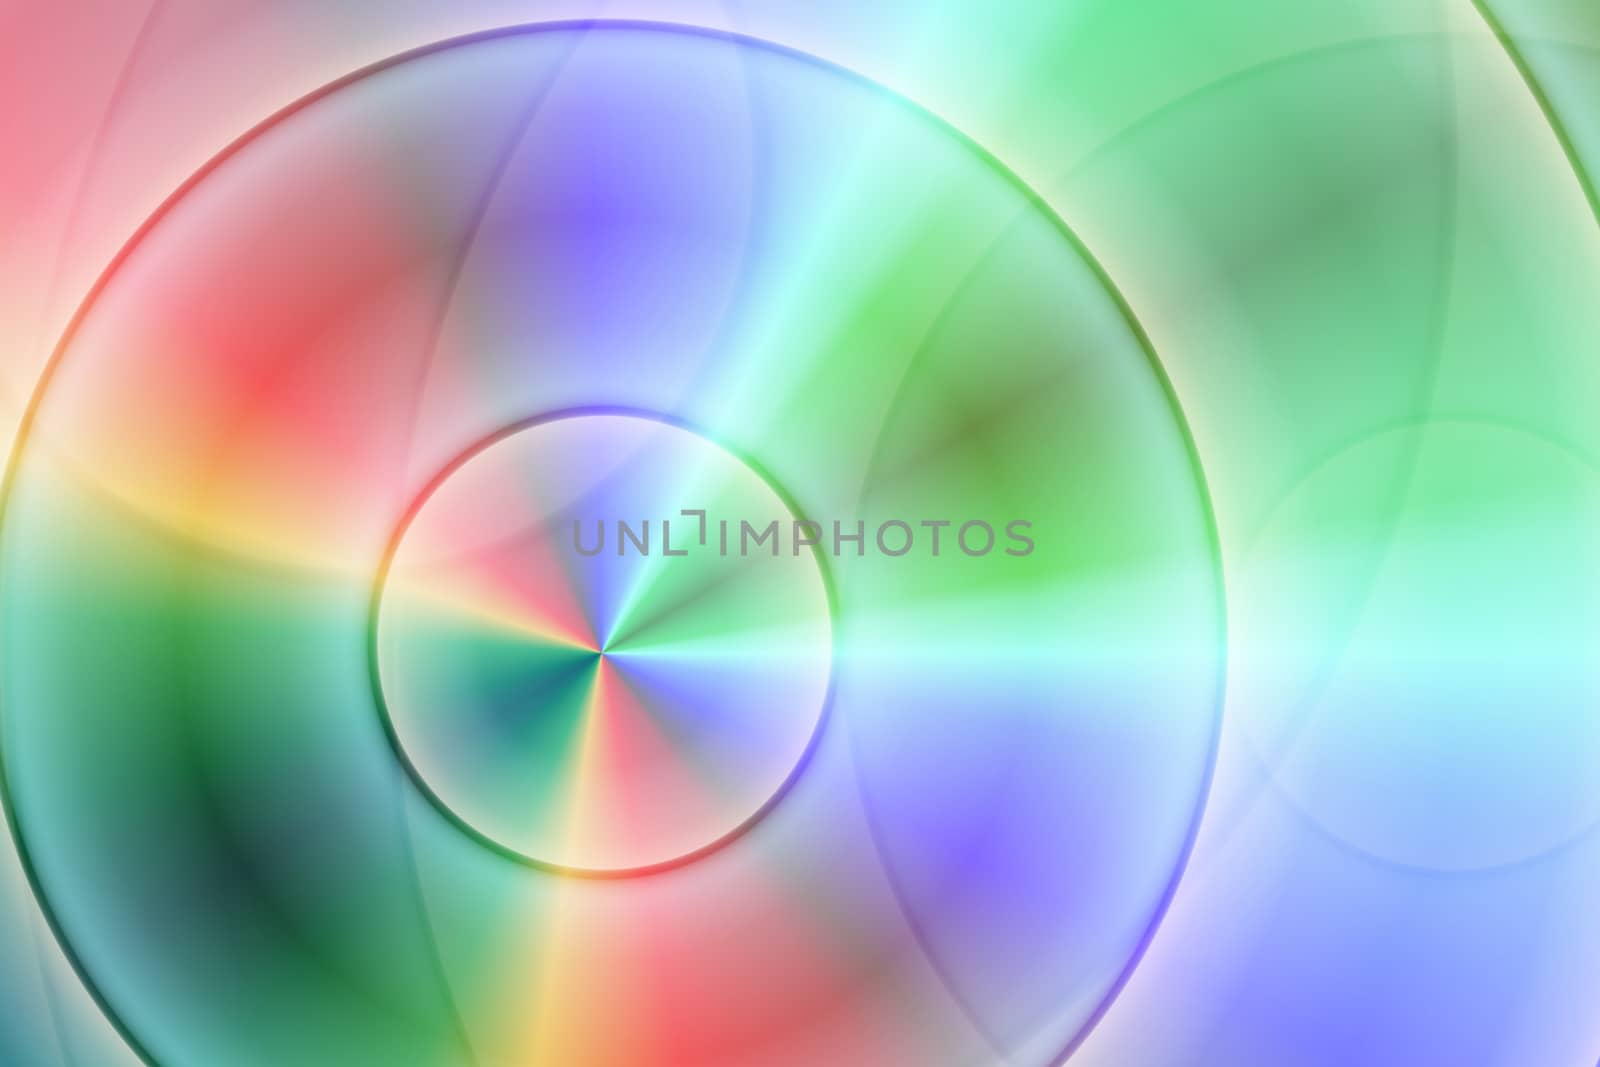 Full color circle abstract background, Disk color background